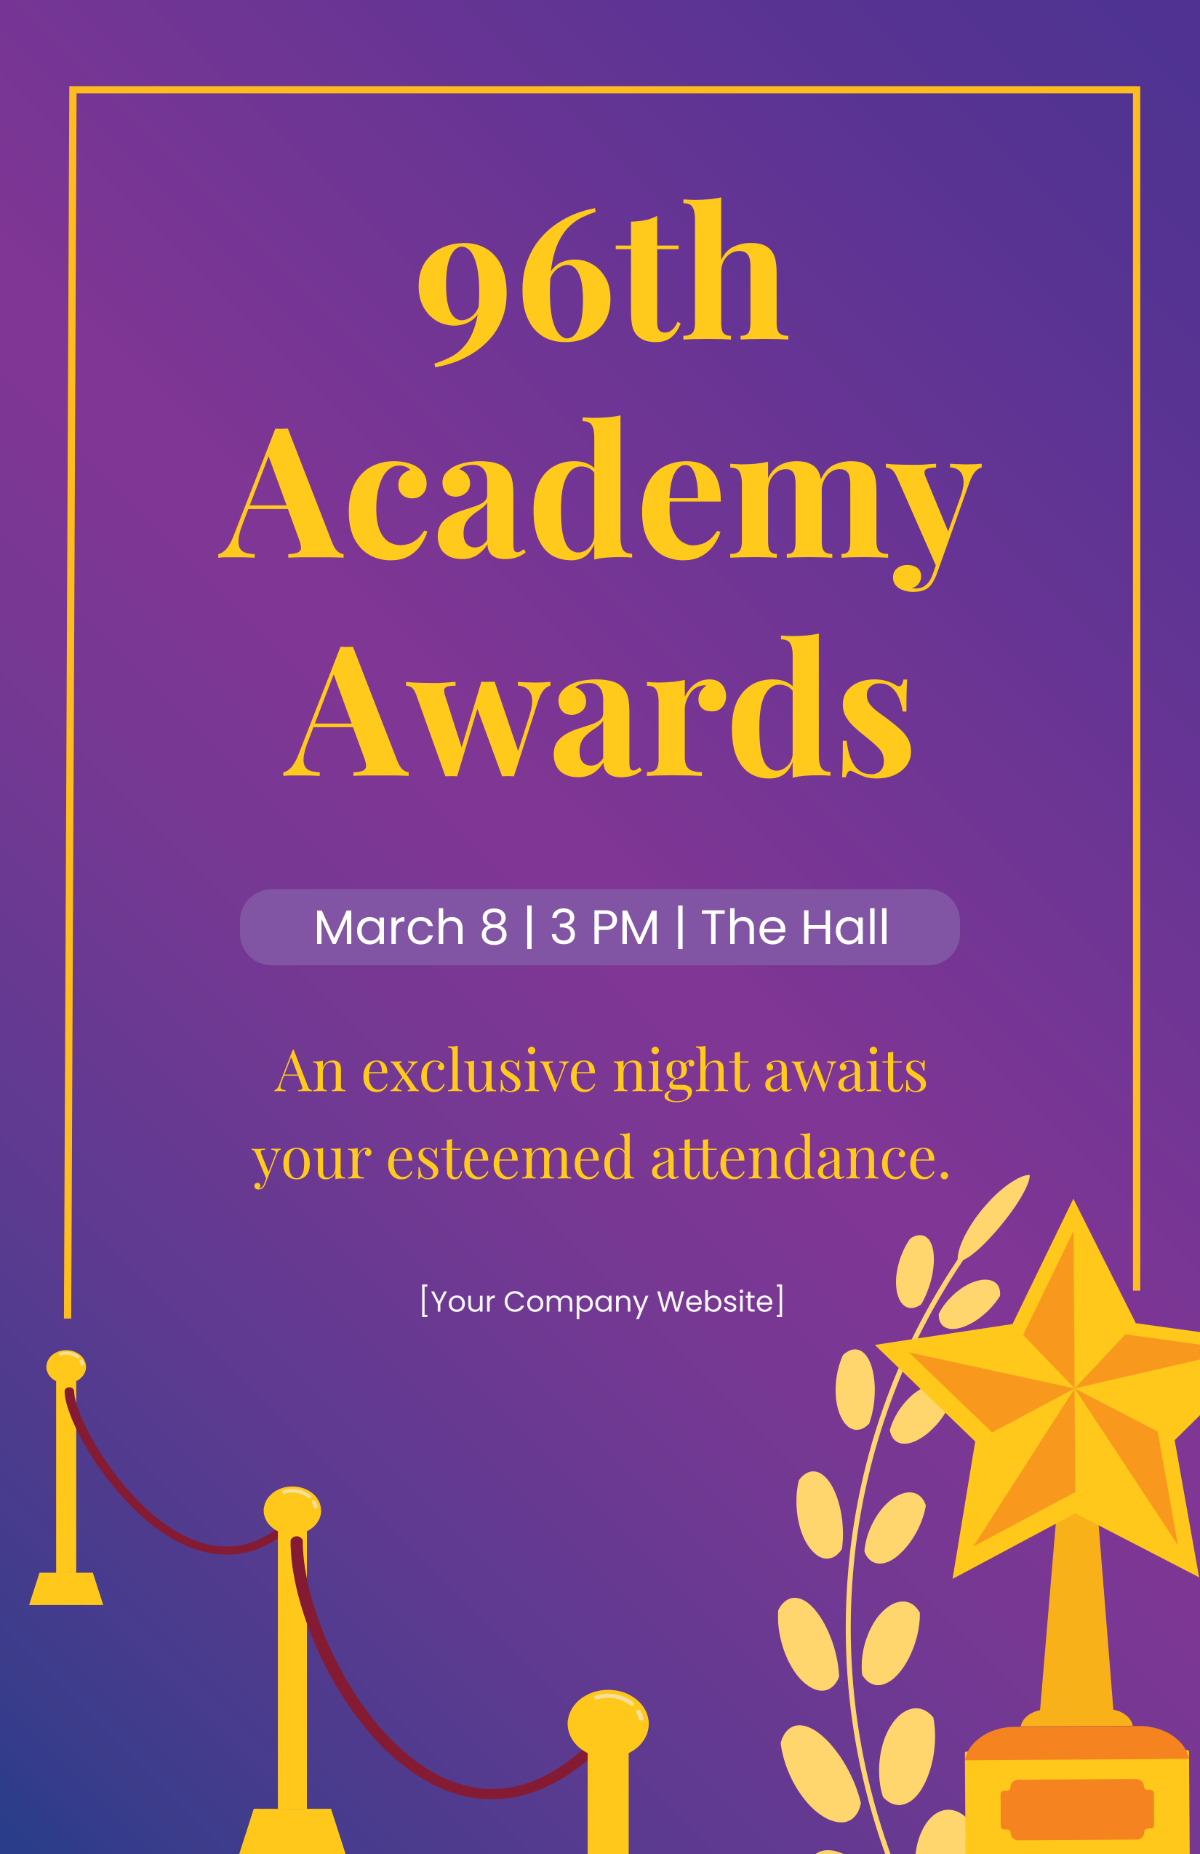 96th Academy Awards Poster Template